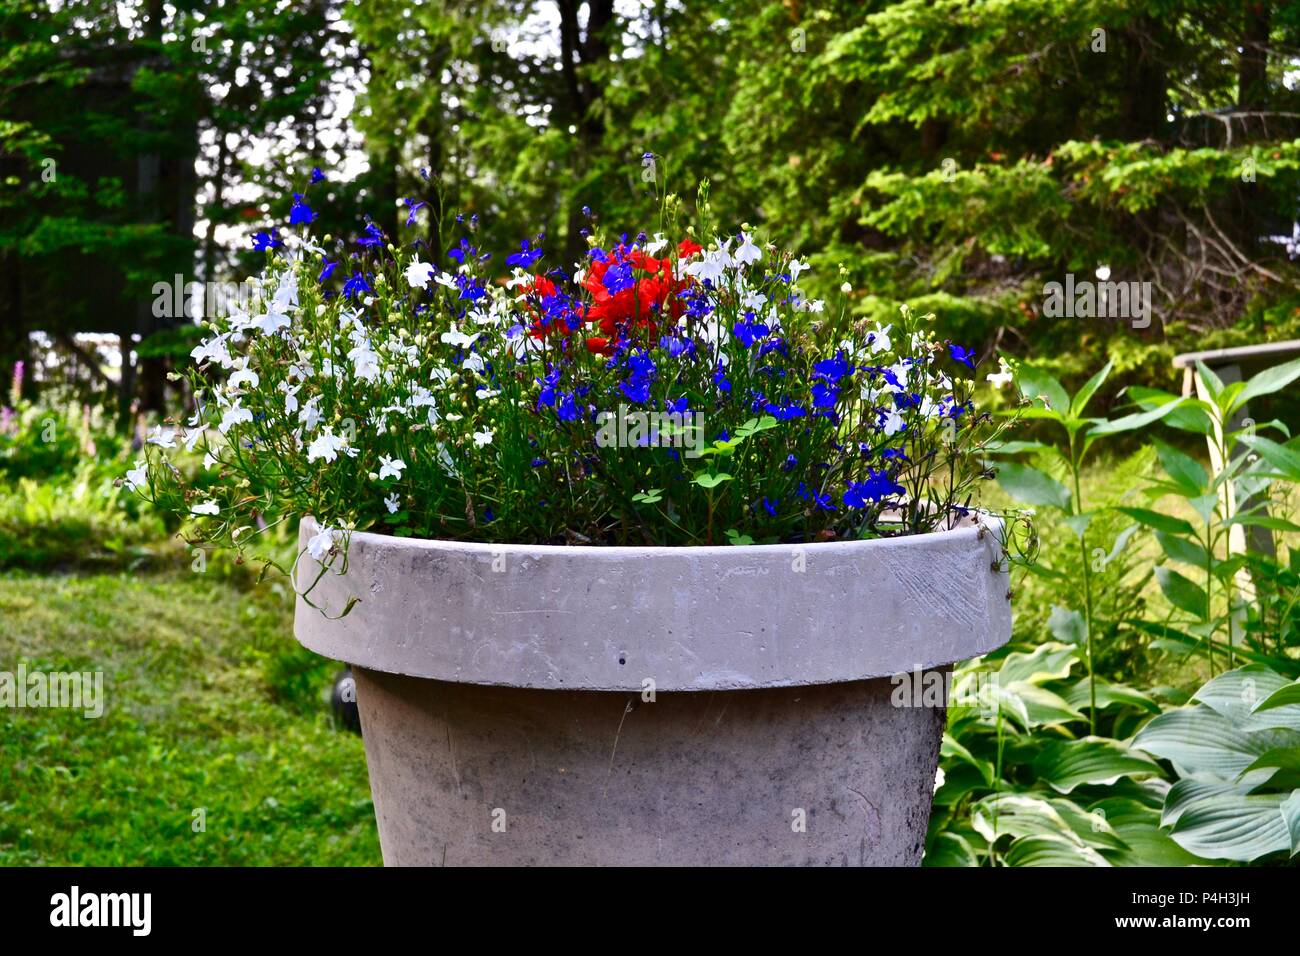 blue and white lobelia flowers in large clay pot in outdoor garden Stock Photo